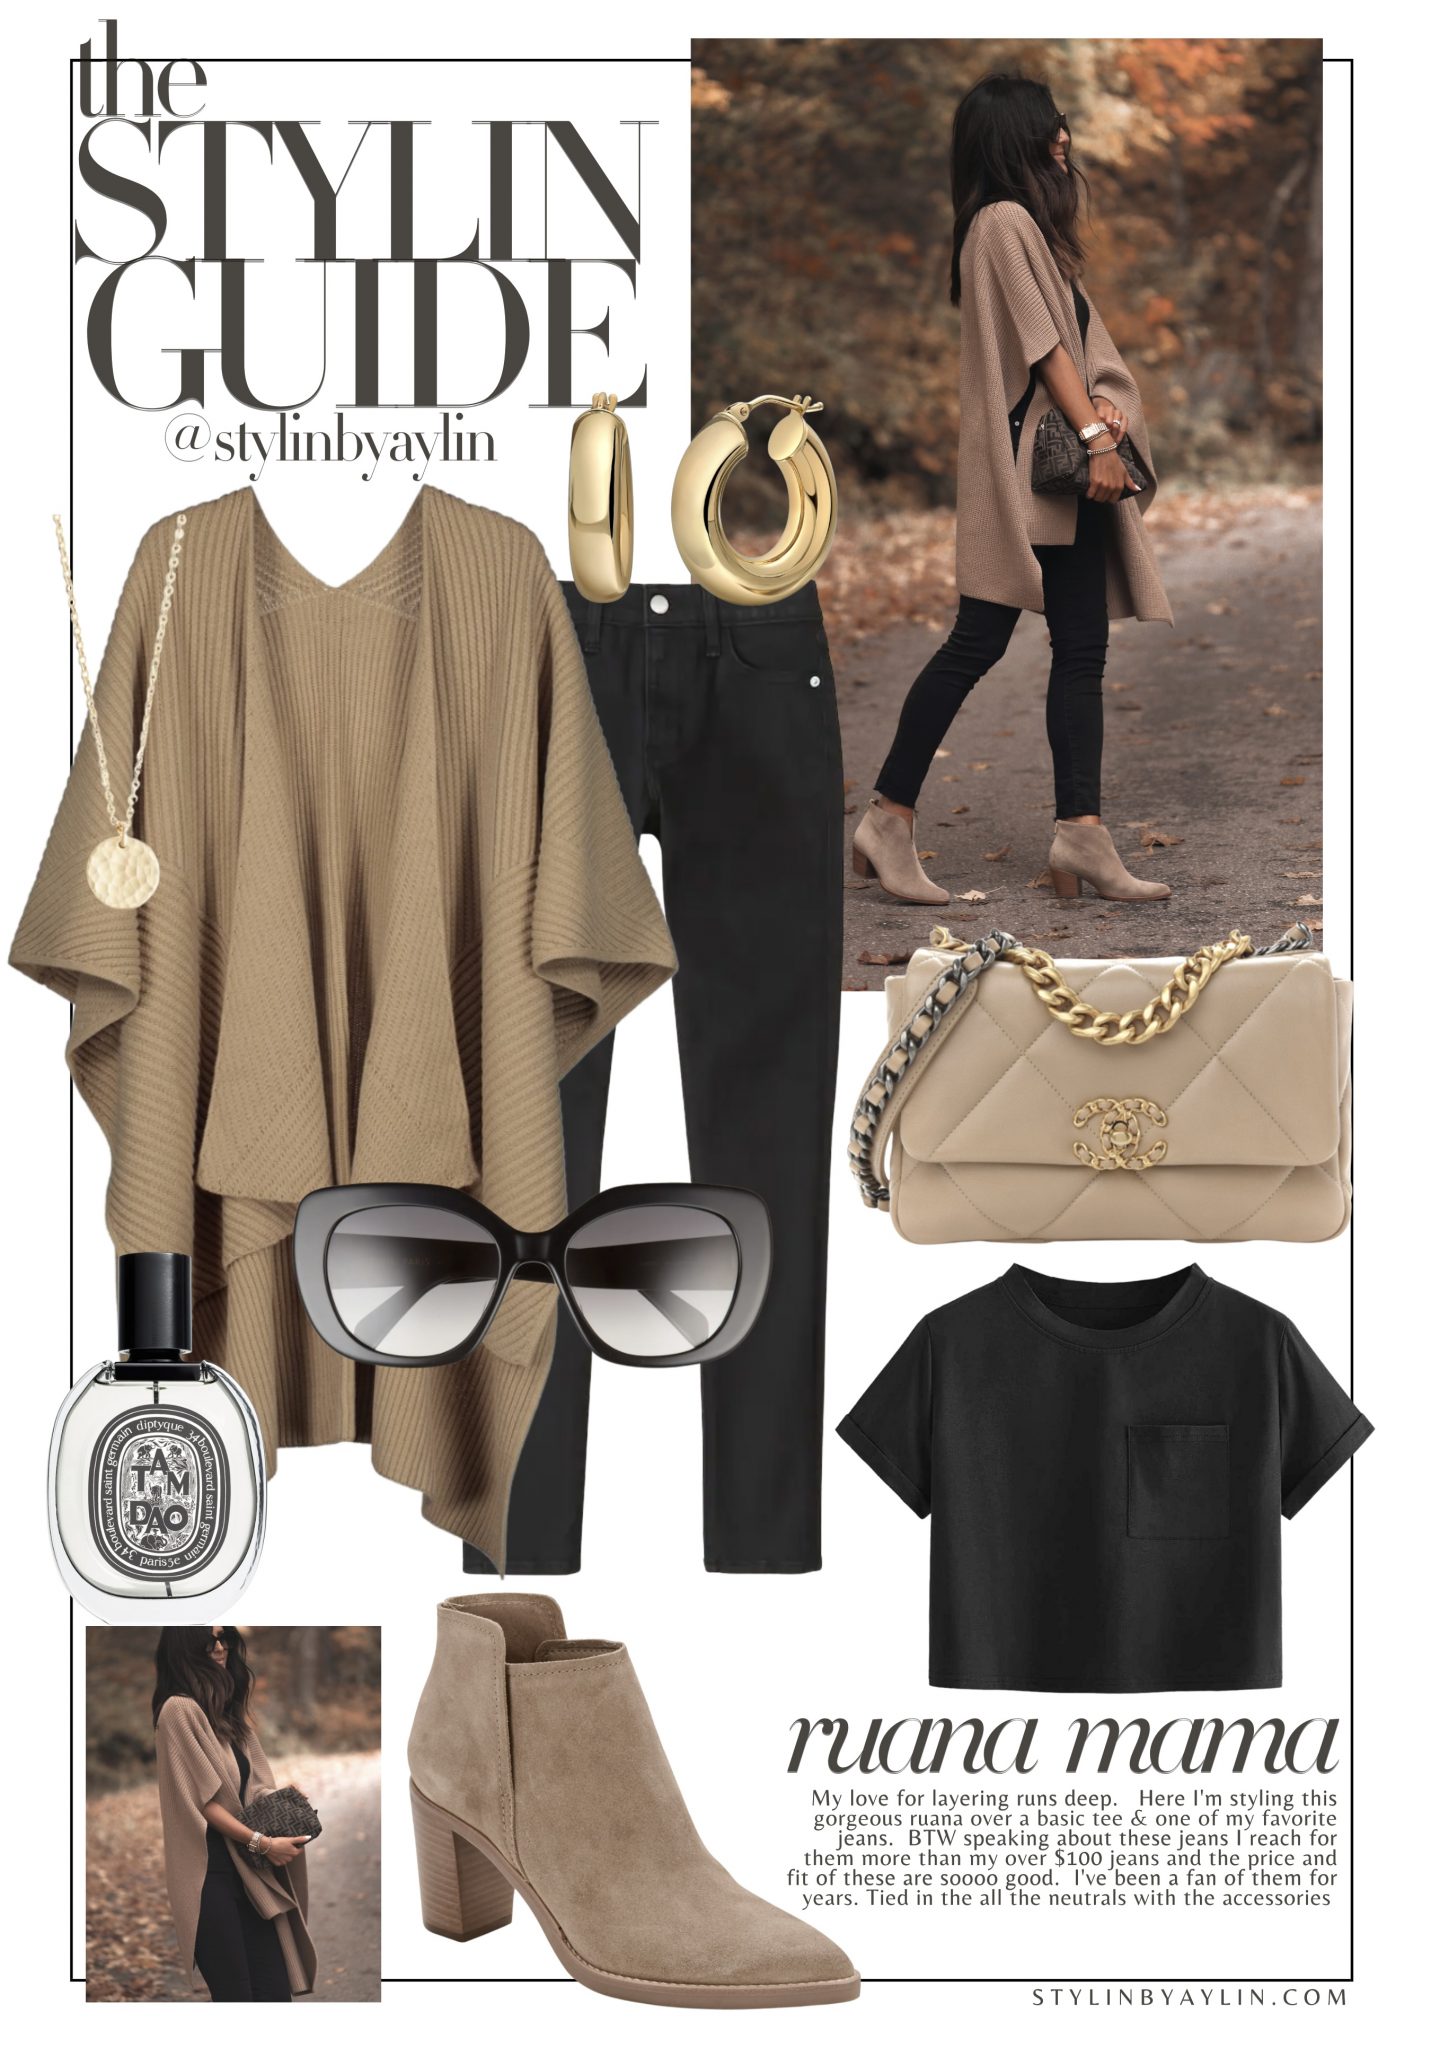 THE STYLIN GUIDE - Stylin by Aylin